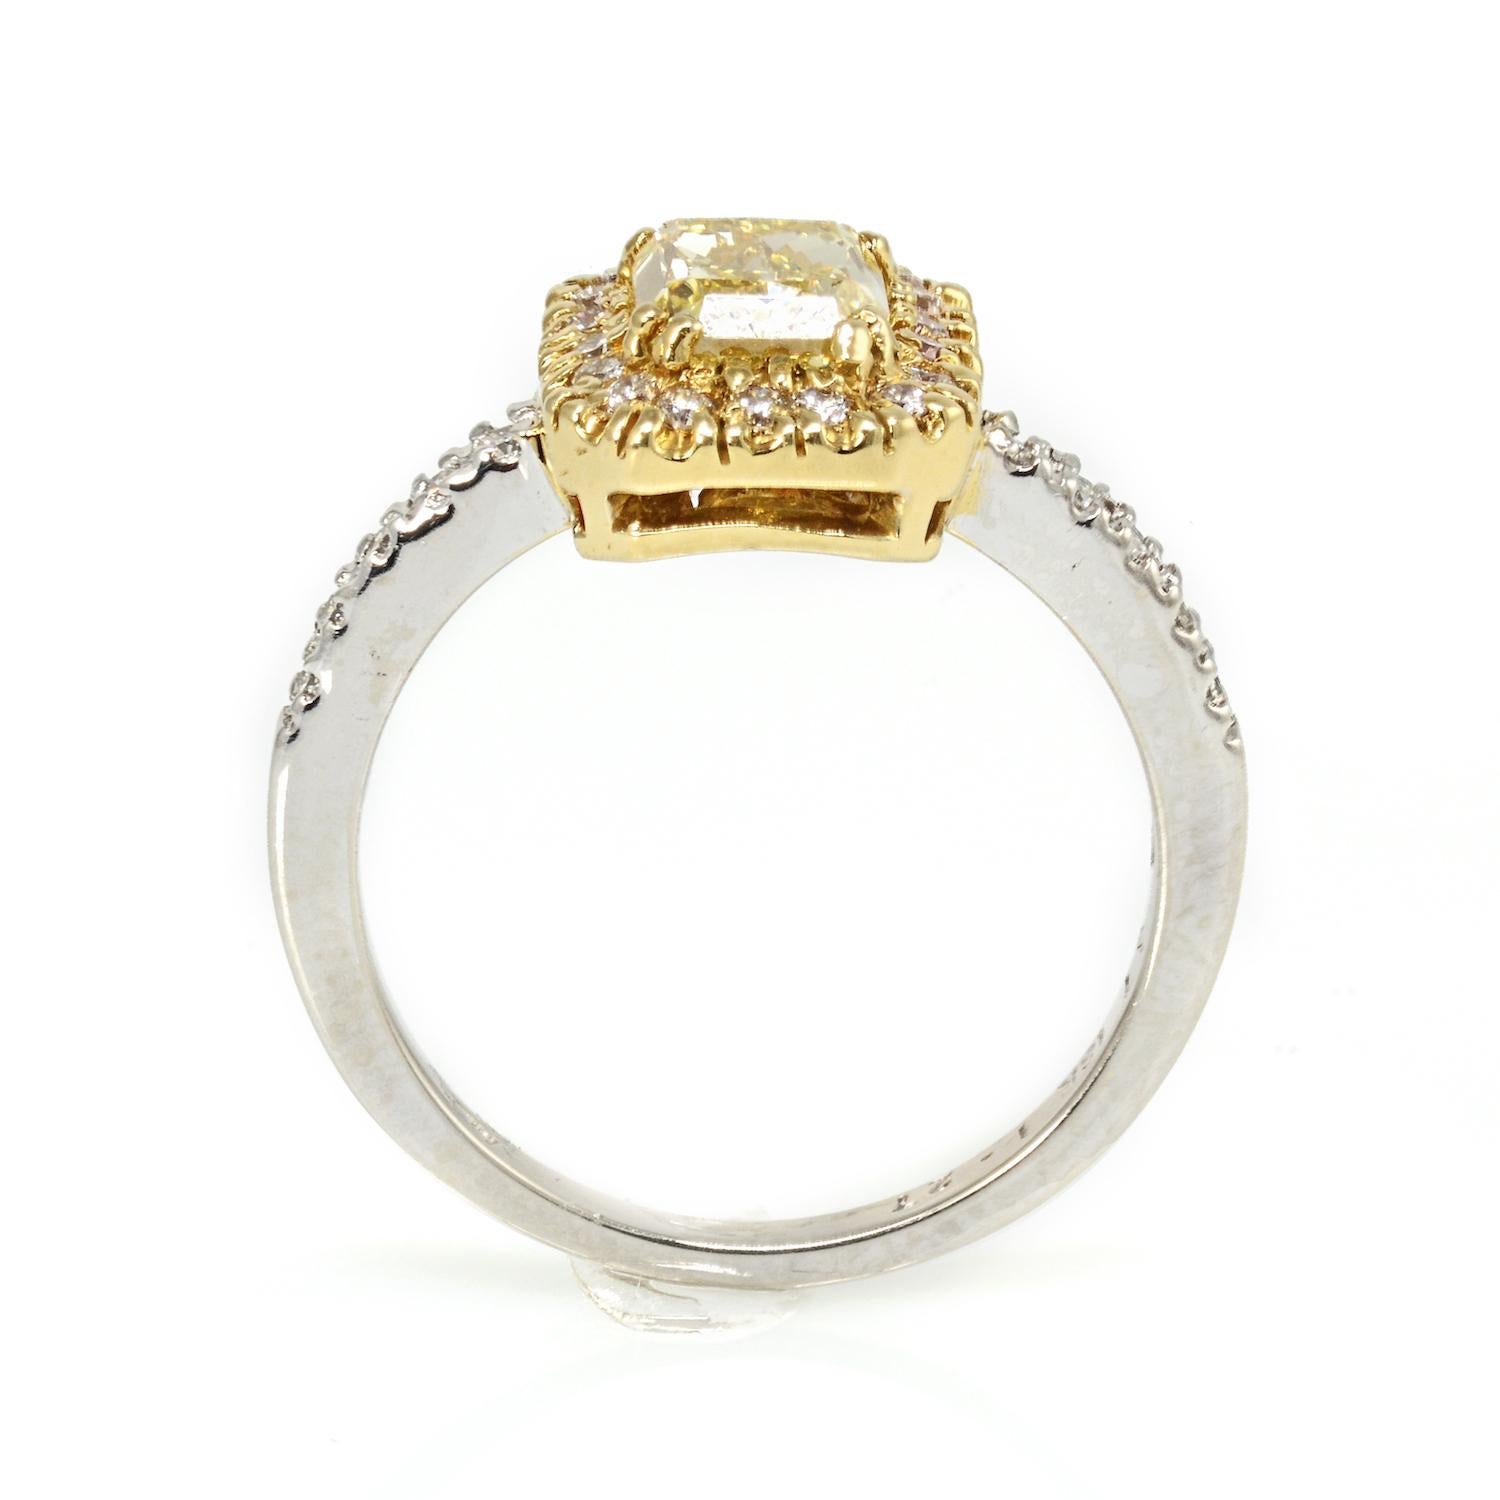 Fancy Yellow Cushion Cut Halo Set Diamond Engagement Ring

This ring is handcrafted with a fancy yellow radiant cut diamond in a halo setting. Flanked by white diamonds on the shank this ring looks bigger than what it may seem. Center diamond is a